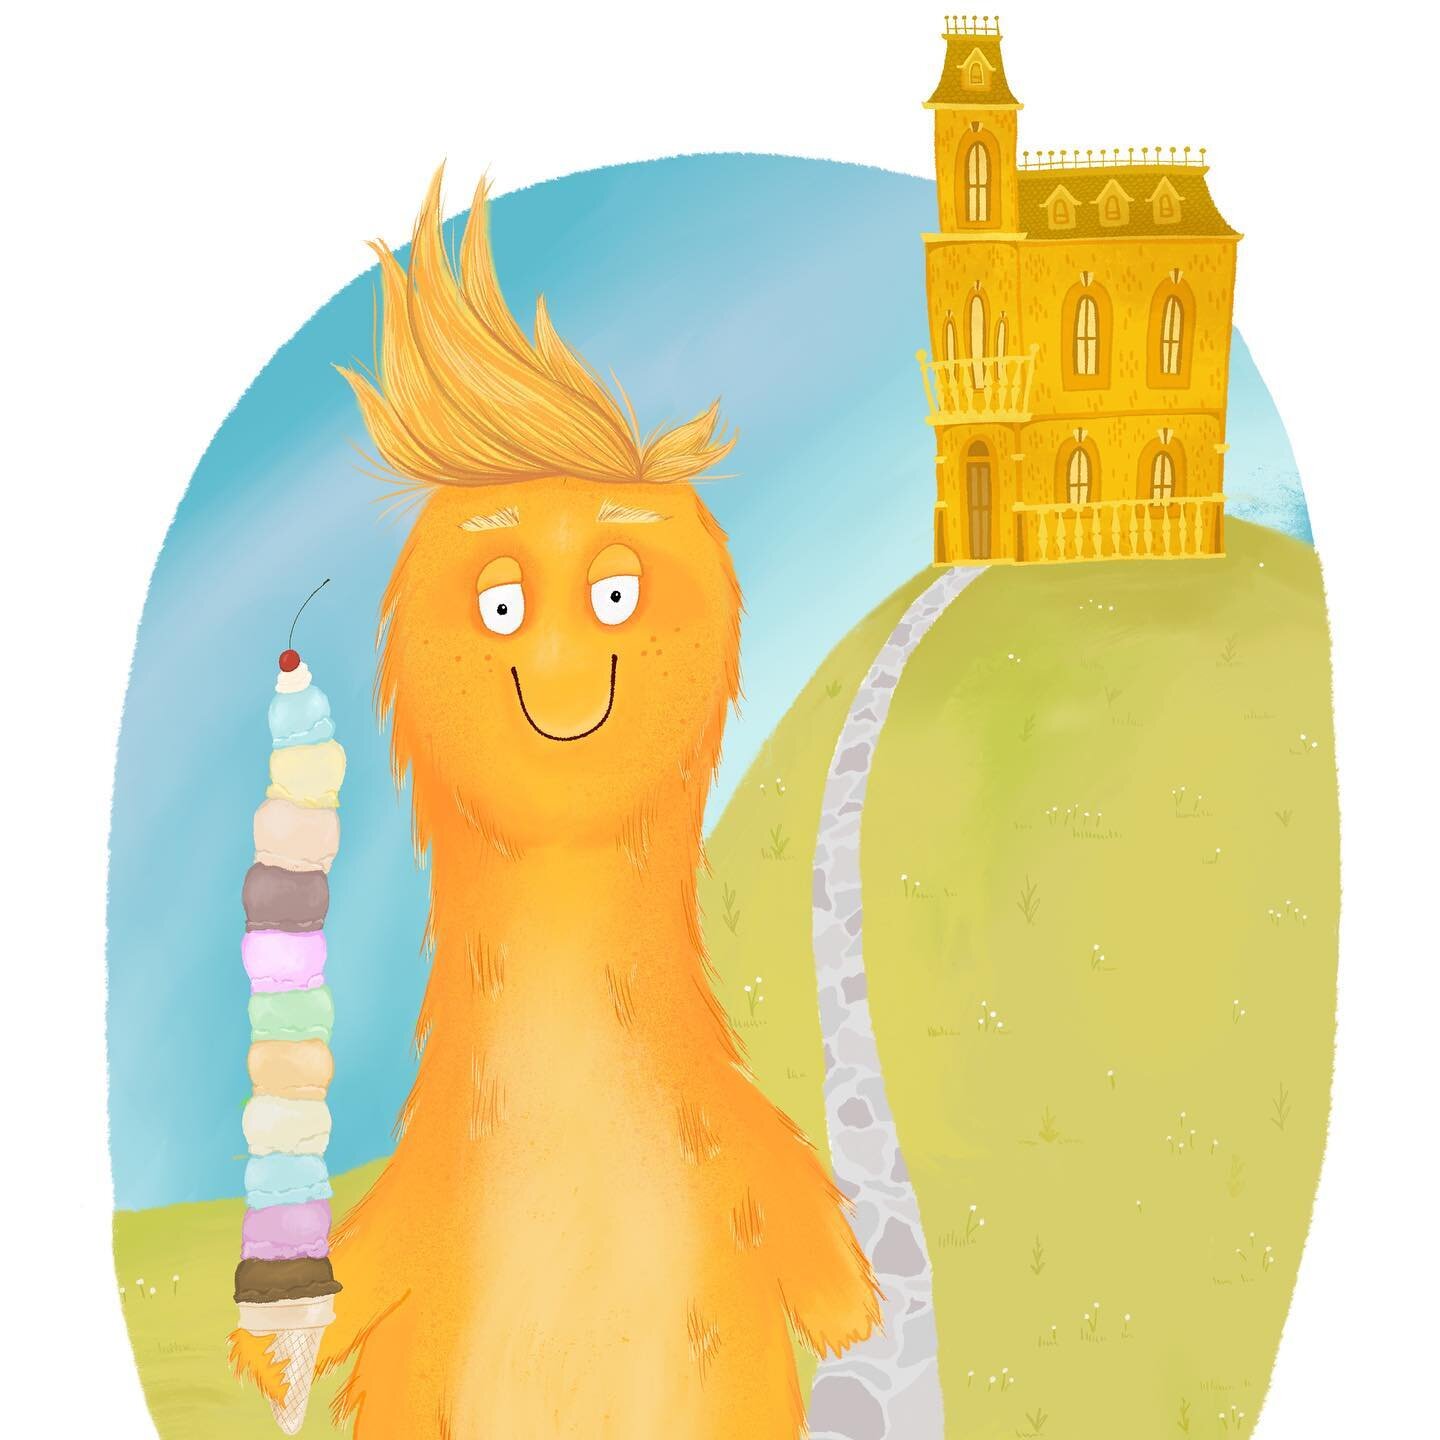 This is my 4th year participating in the Monster Project. This year the student left a lot to the imagination but for some reason I could not get a certain political figure out of my mind... the hair, human monster, living in a gold house... orange s